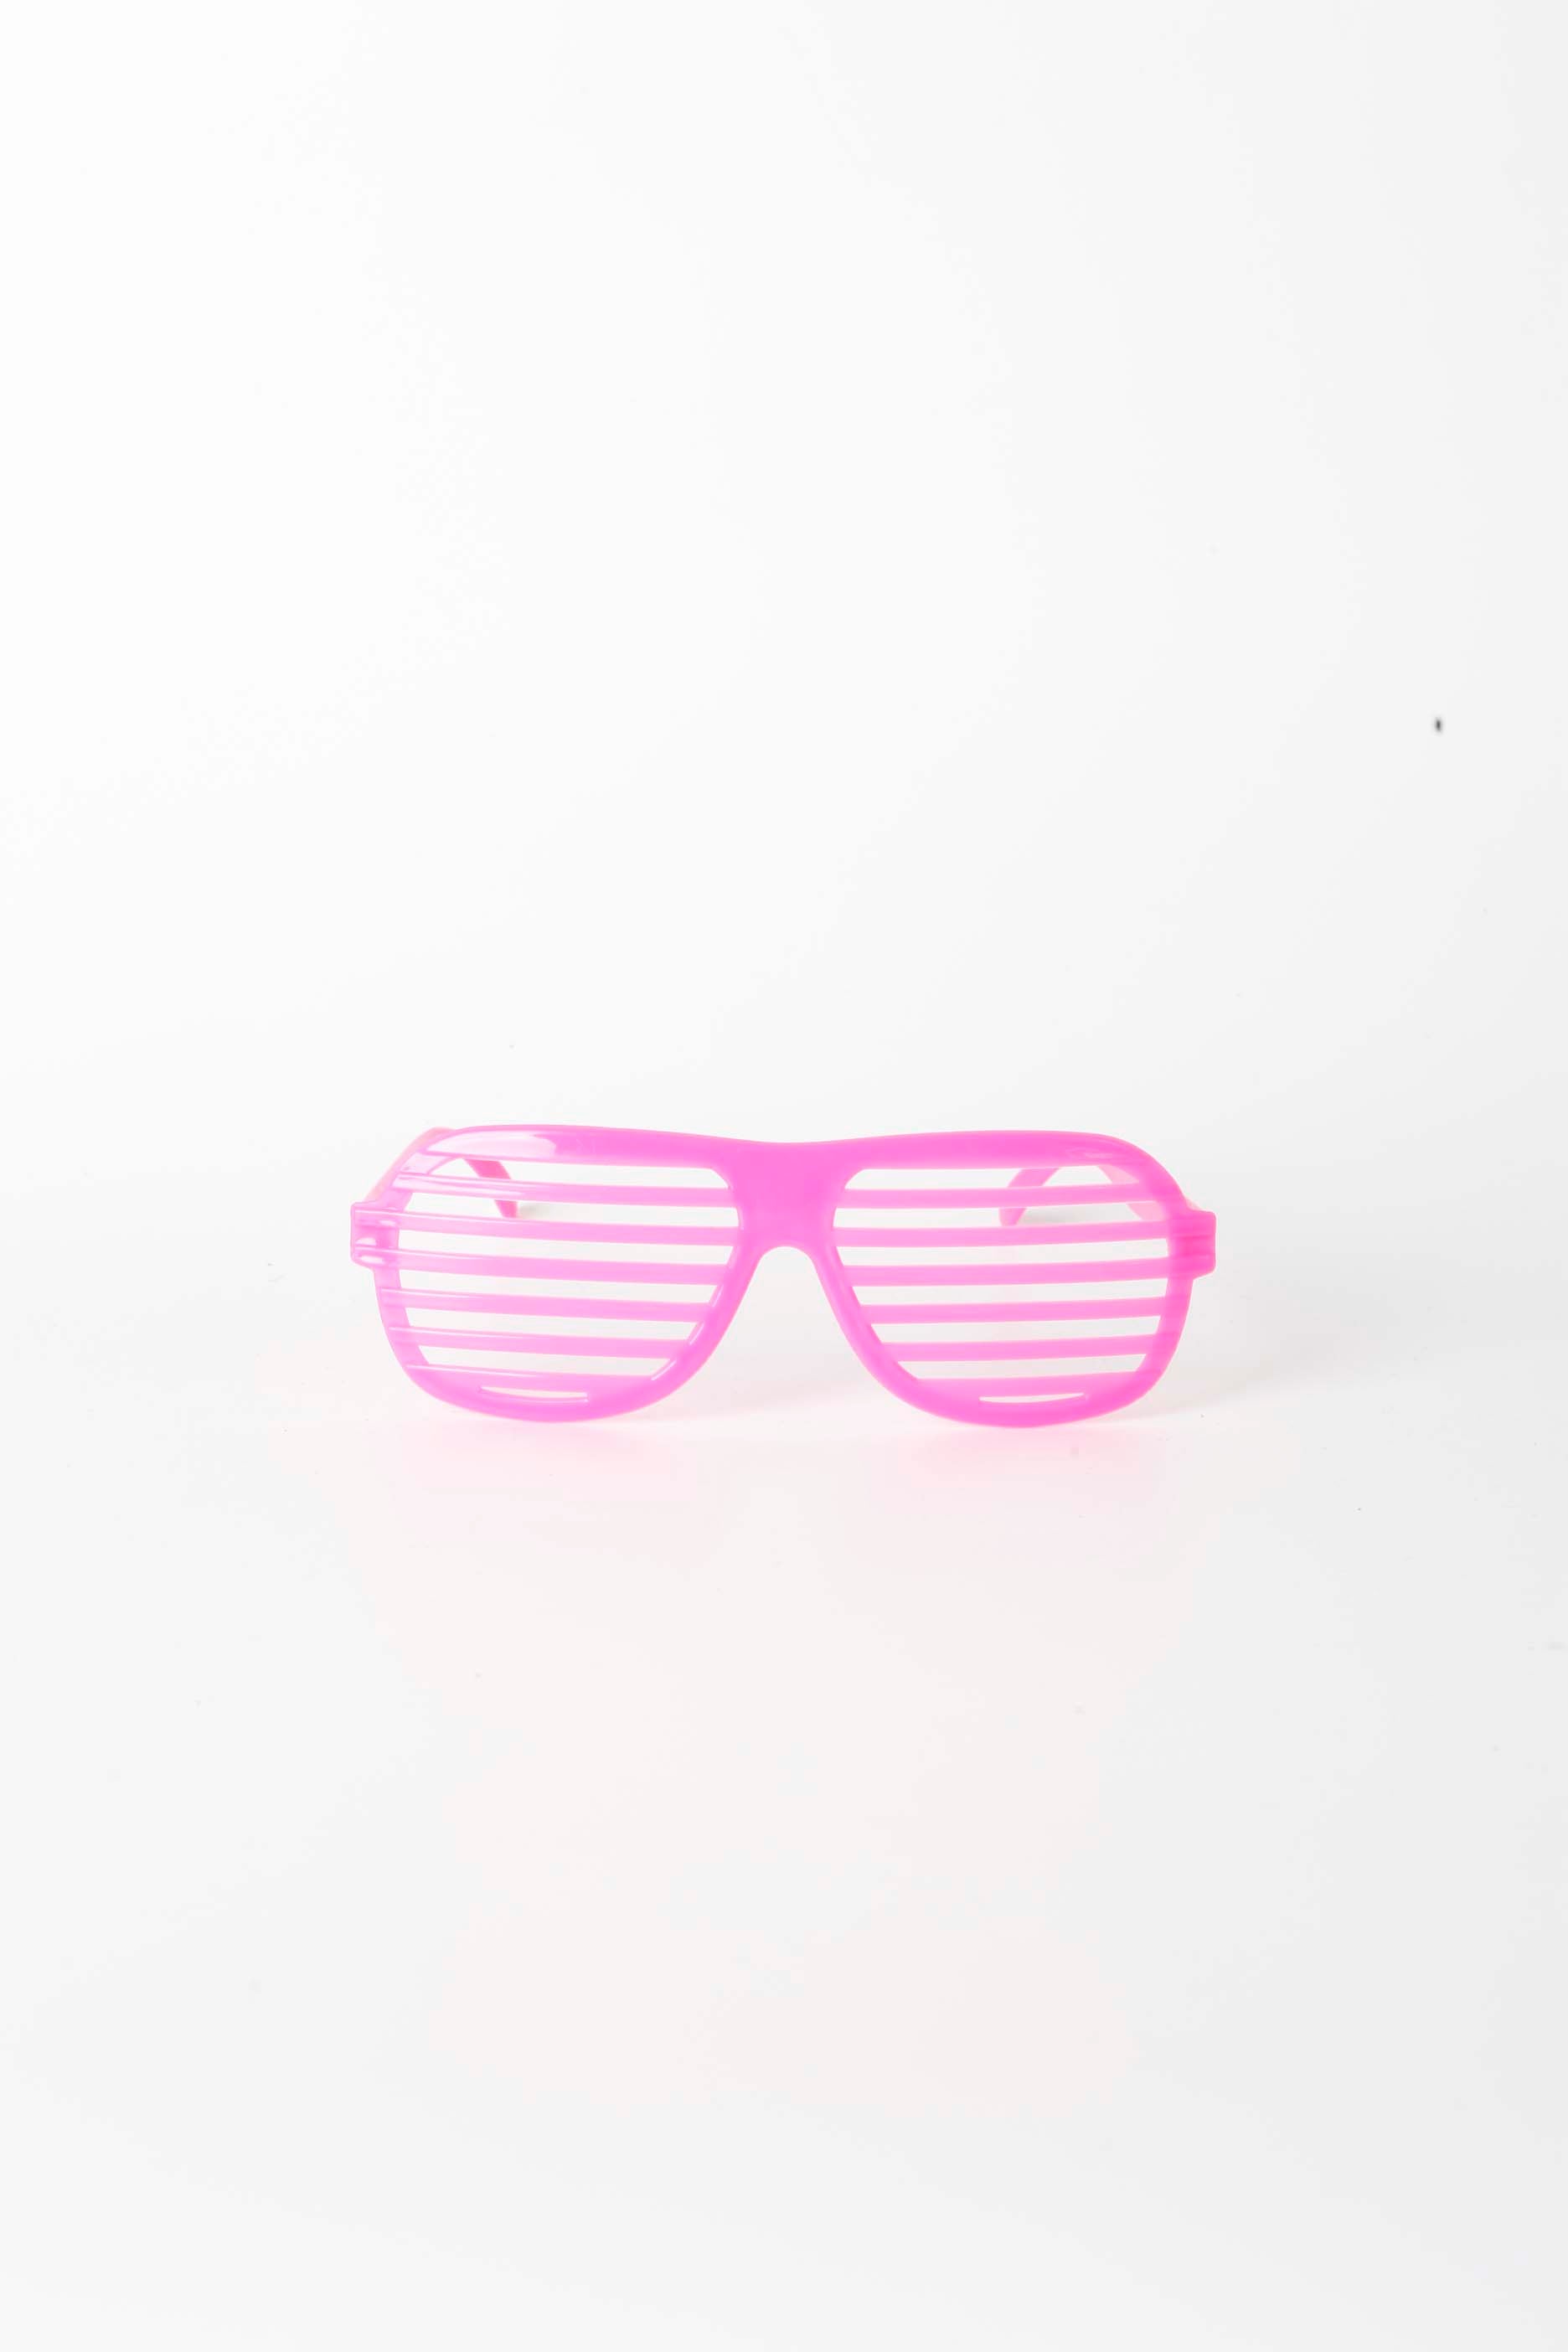 Hot Pink Grill Sunglasses